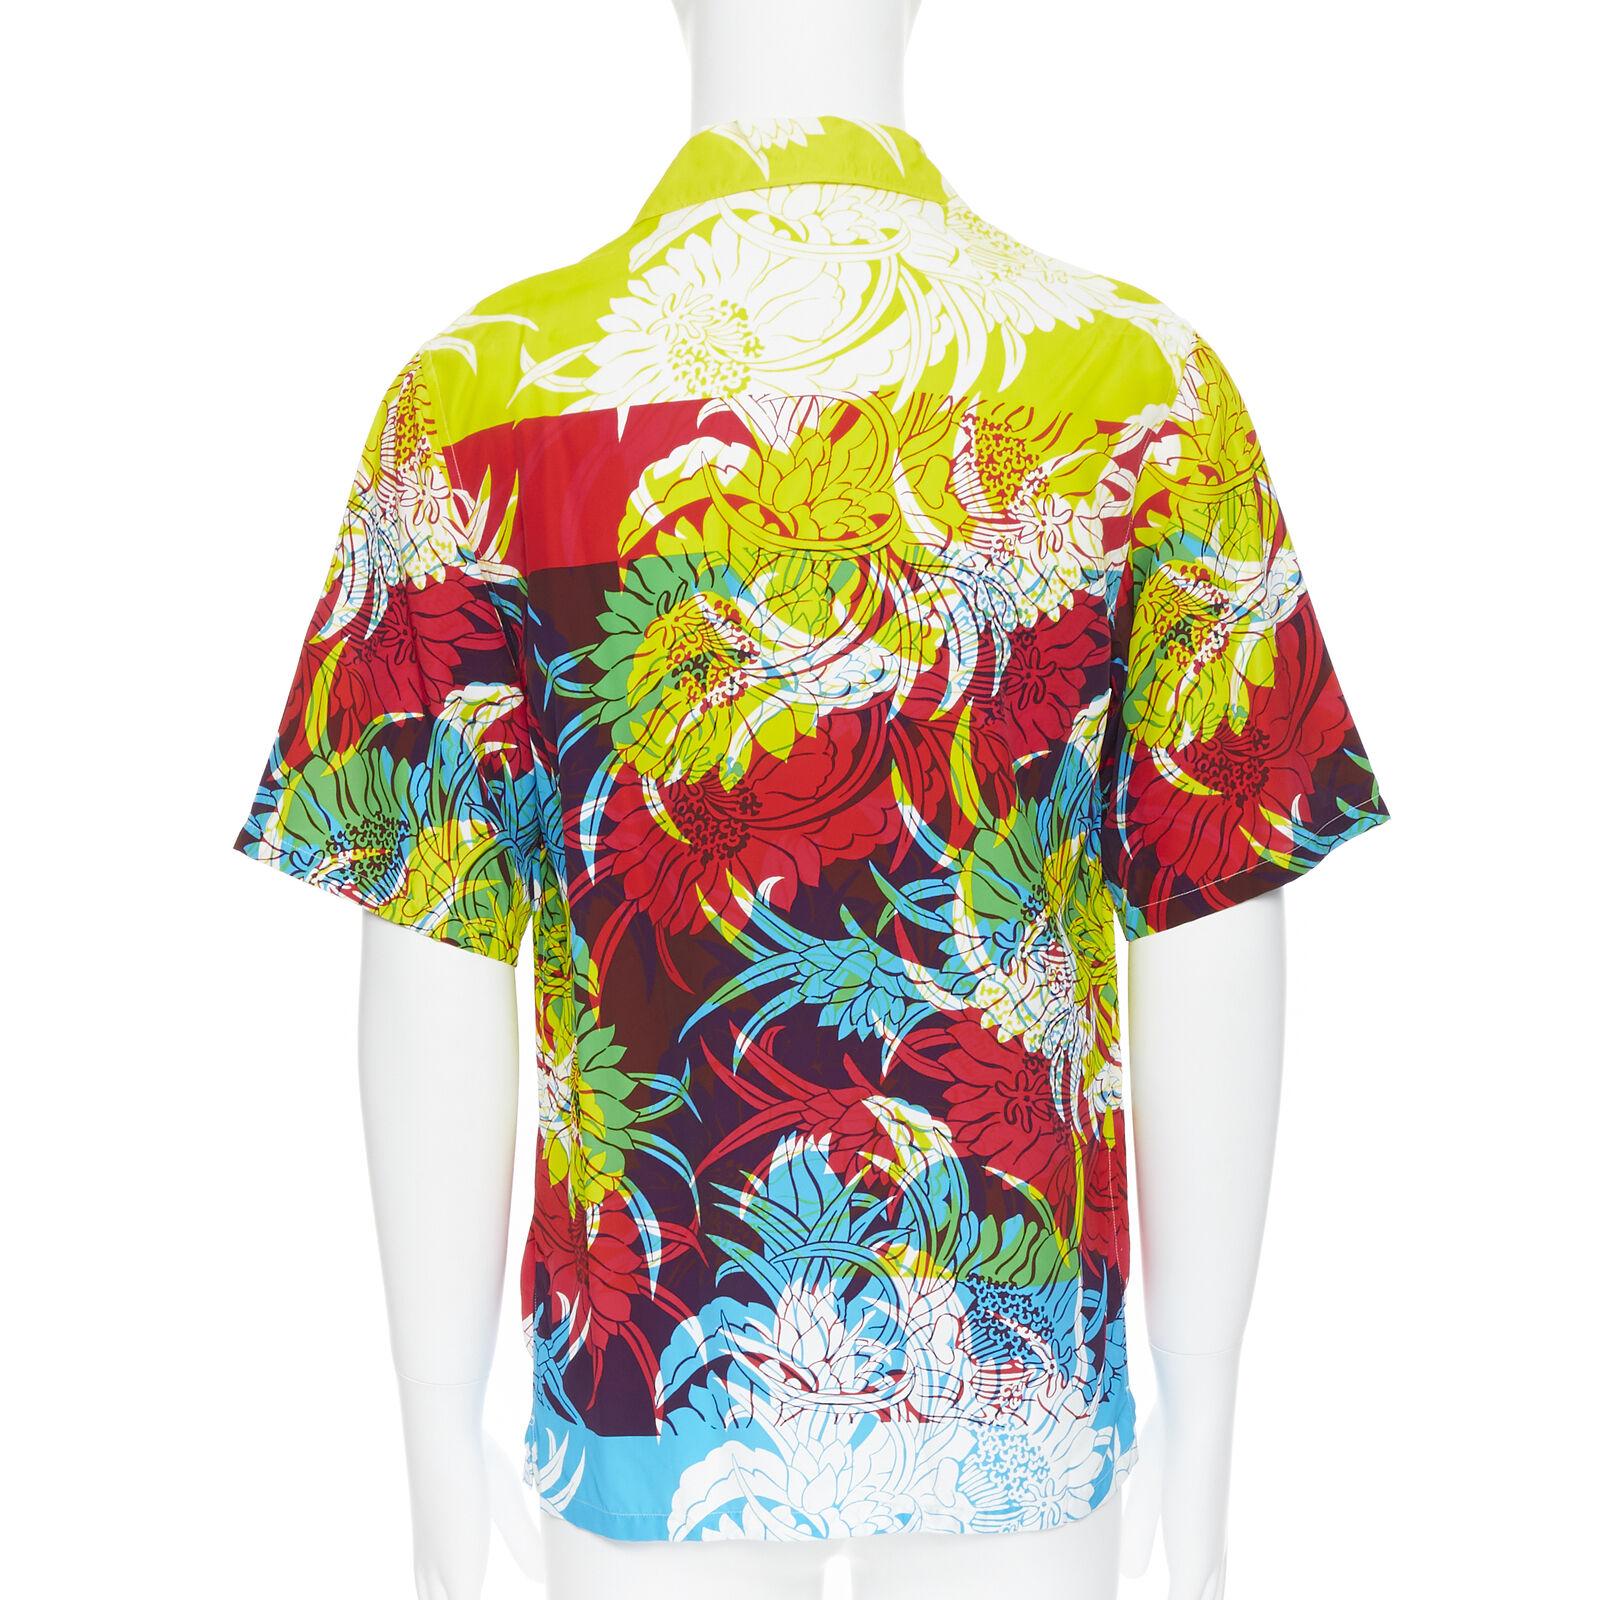 Men's new PRADA 2018 Psychedelic Hibiscus yellow floral print Hawaiian bowling shirt S For Sale